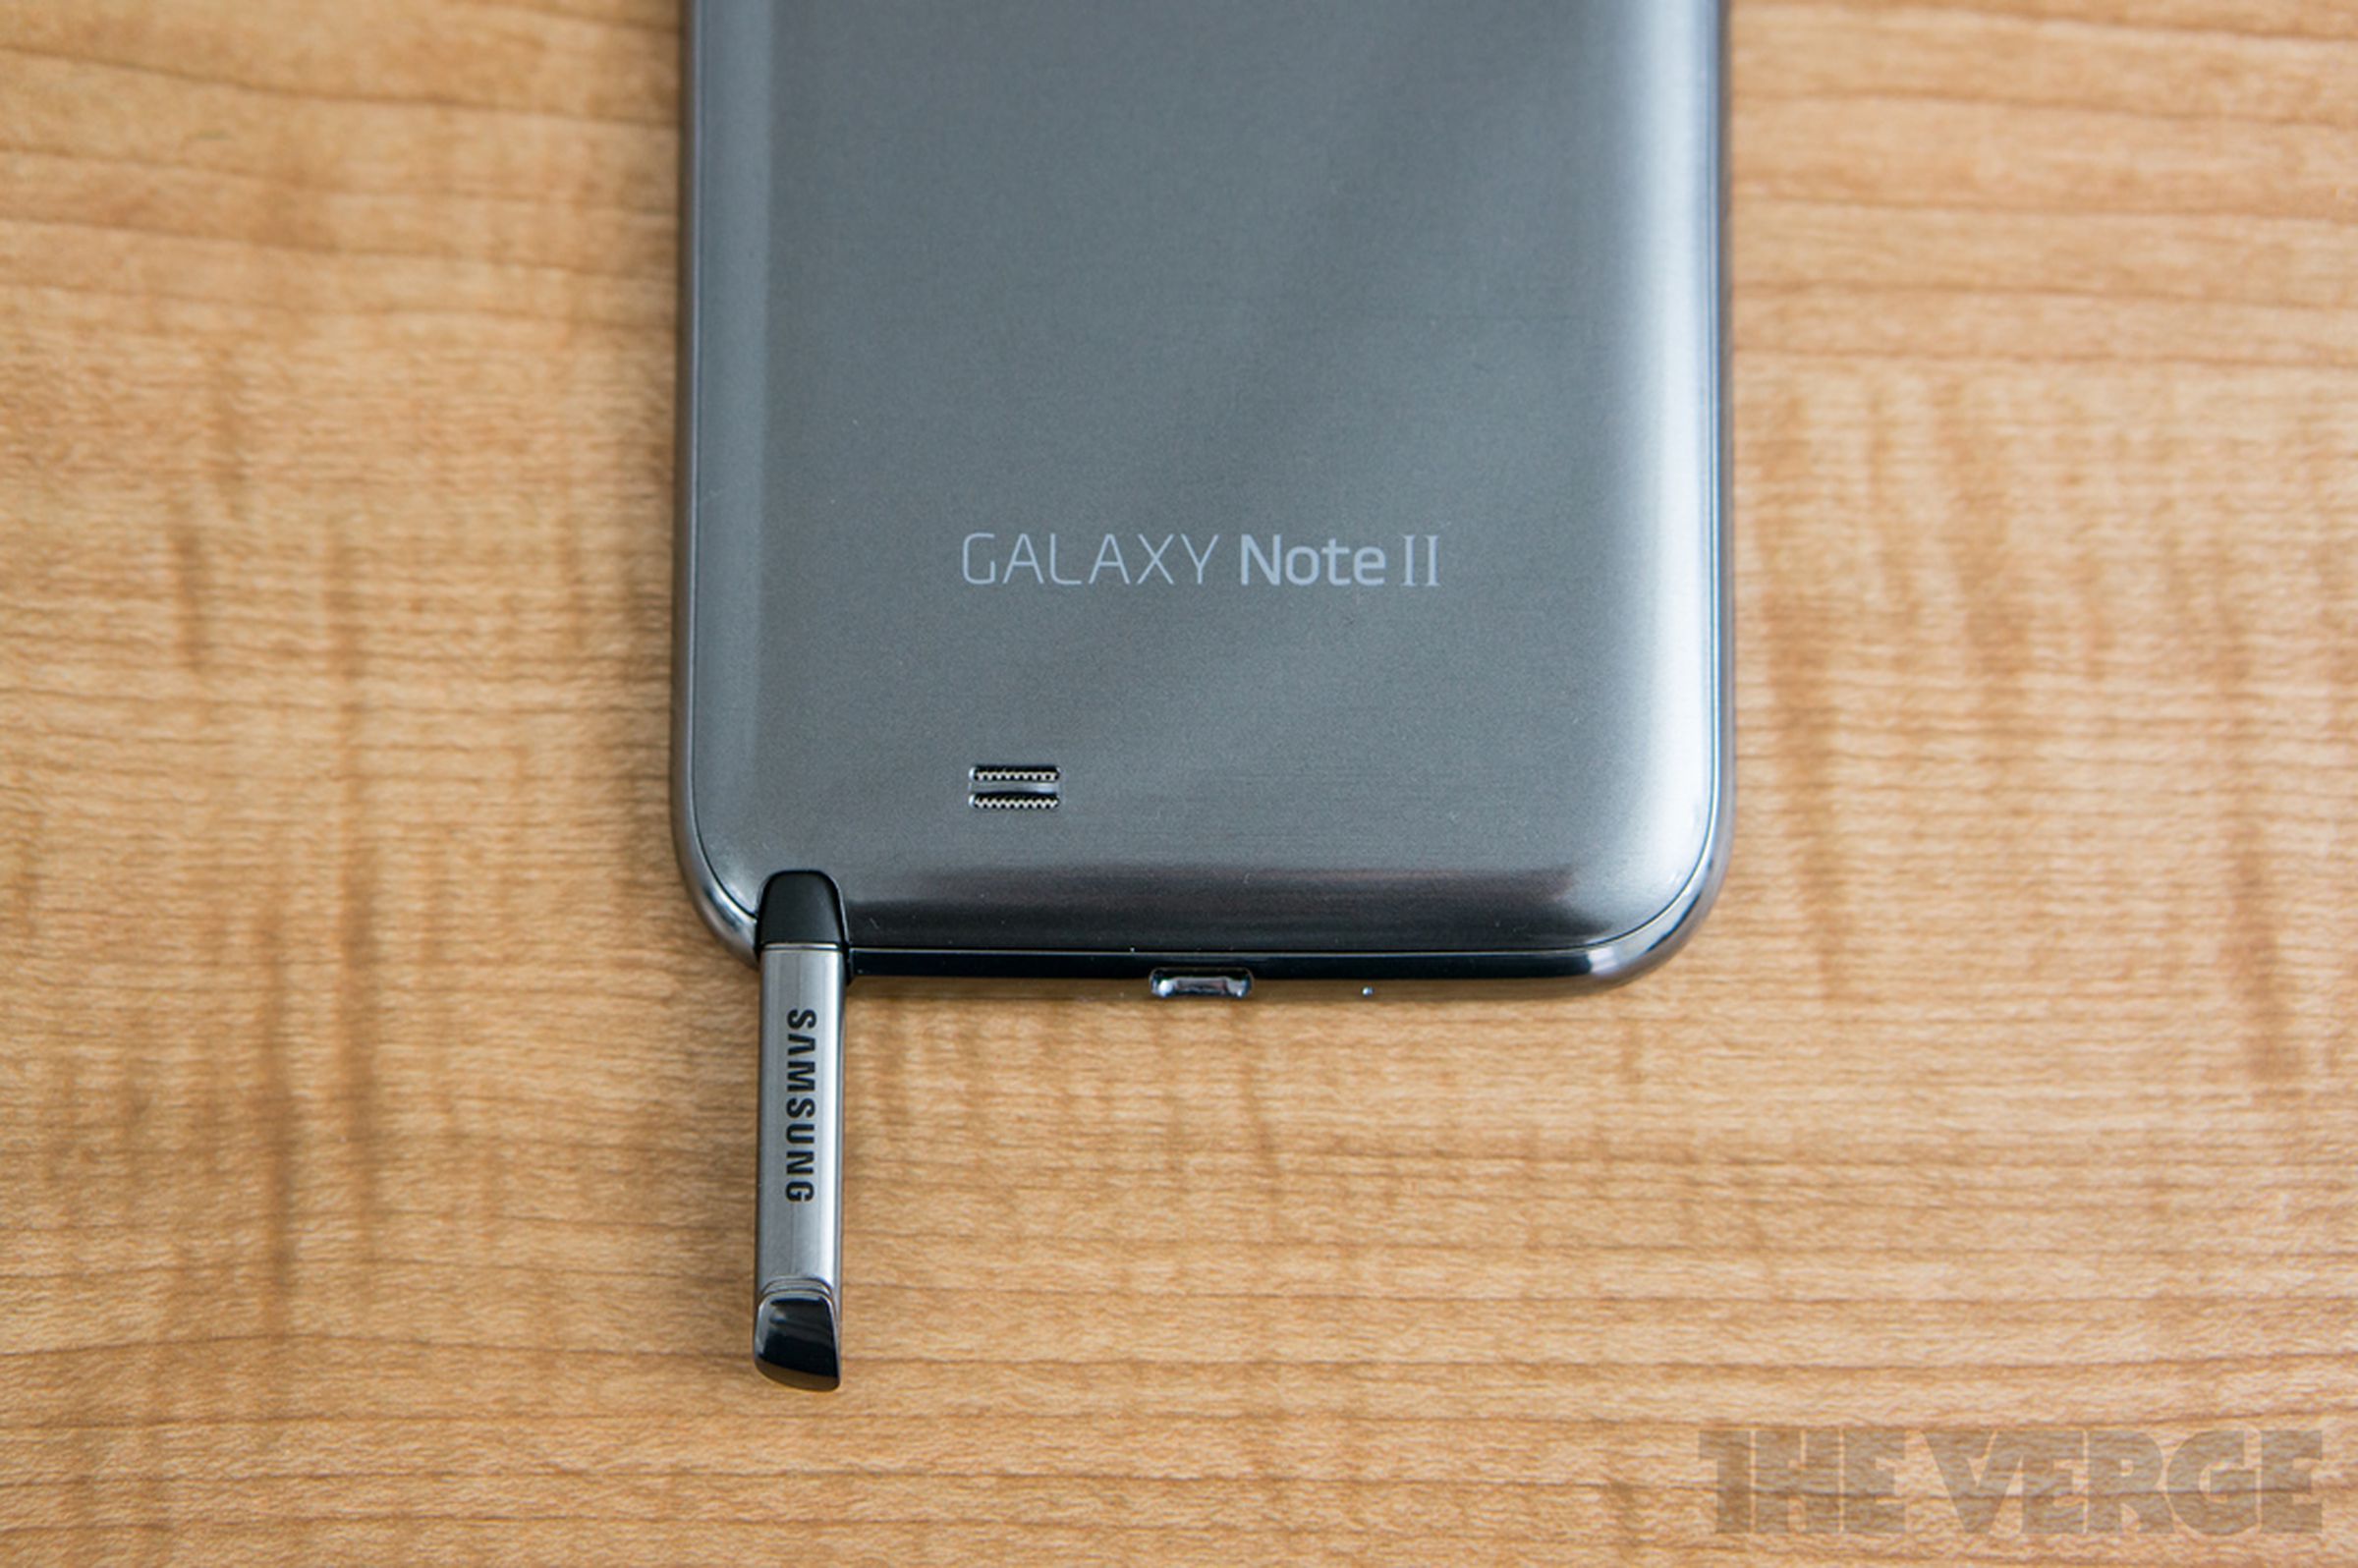 Samsung Galaxy Note II for AT&T review photos